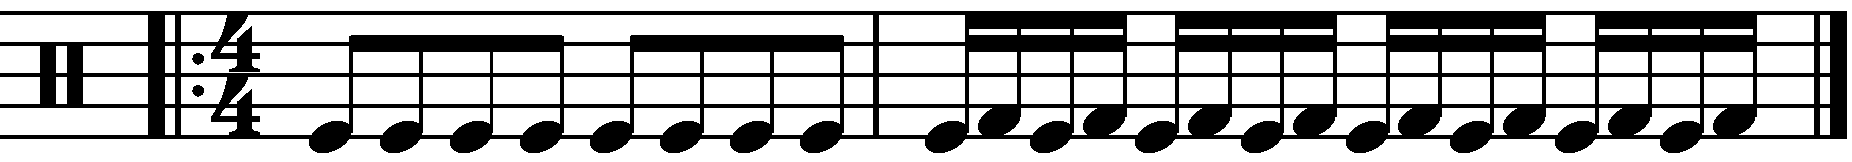 The reversed eighth note to sixteenth note exercise.